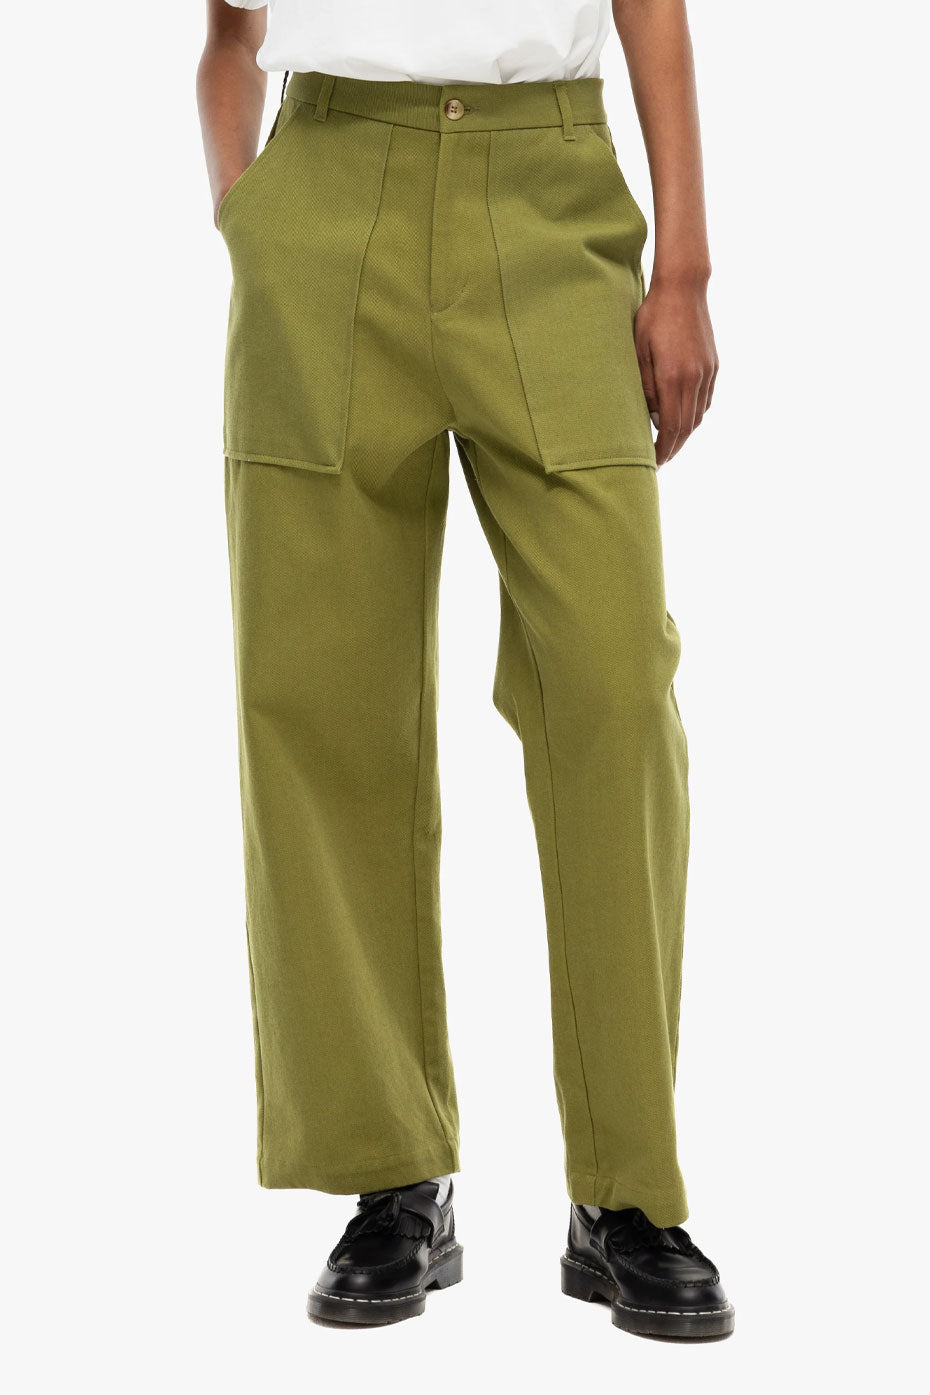 Our Sister Green Animal Contrast Stitching Pants